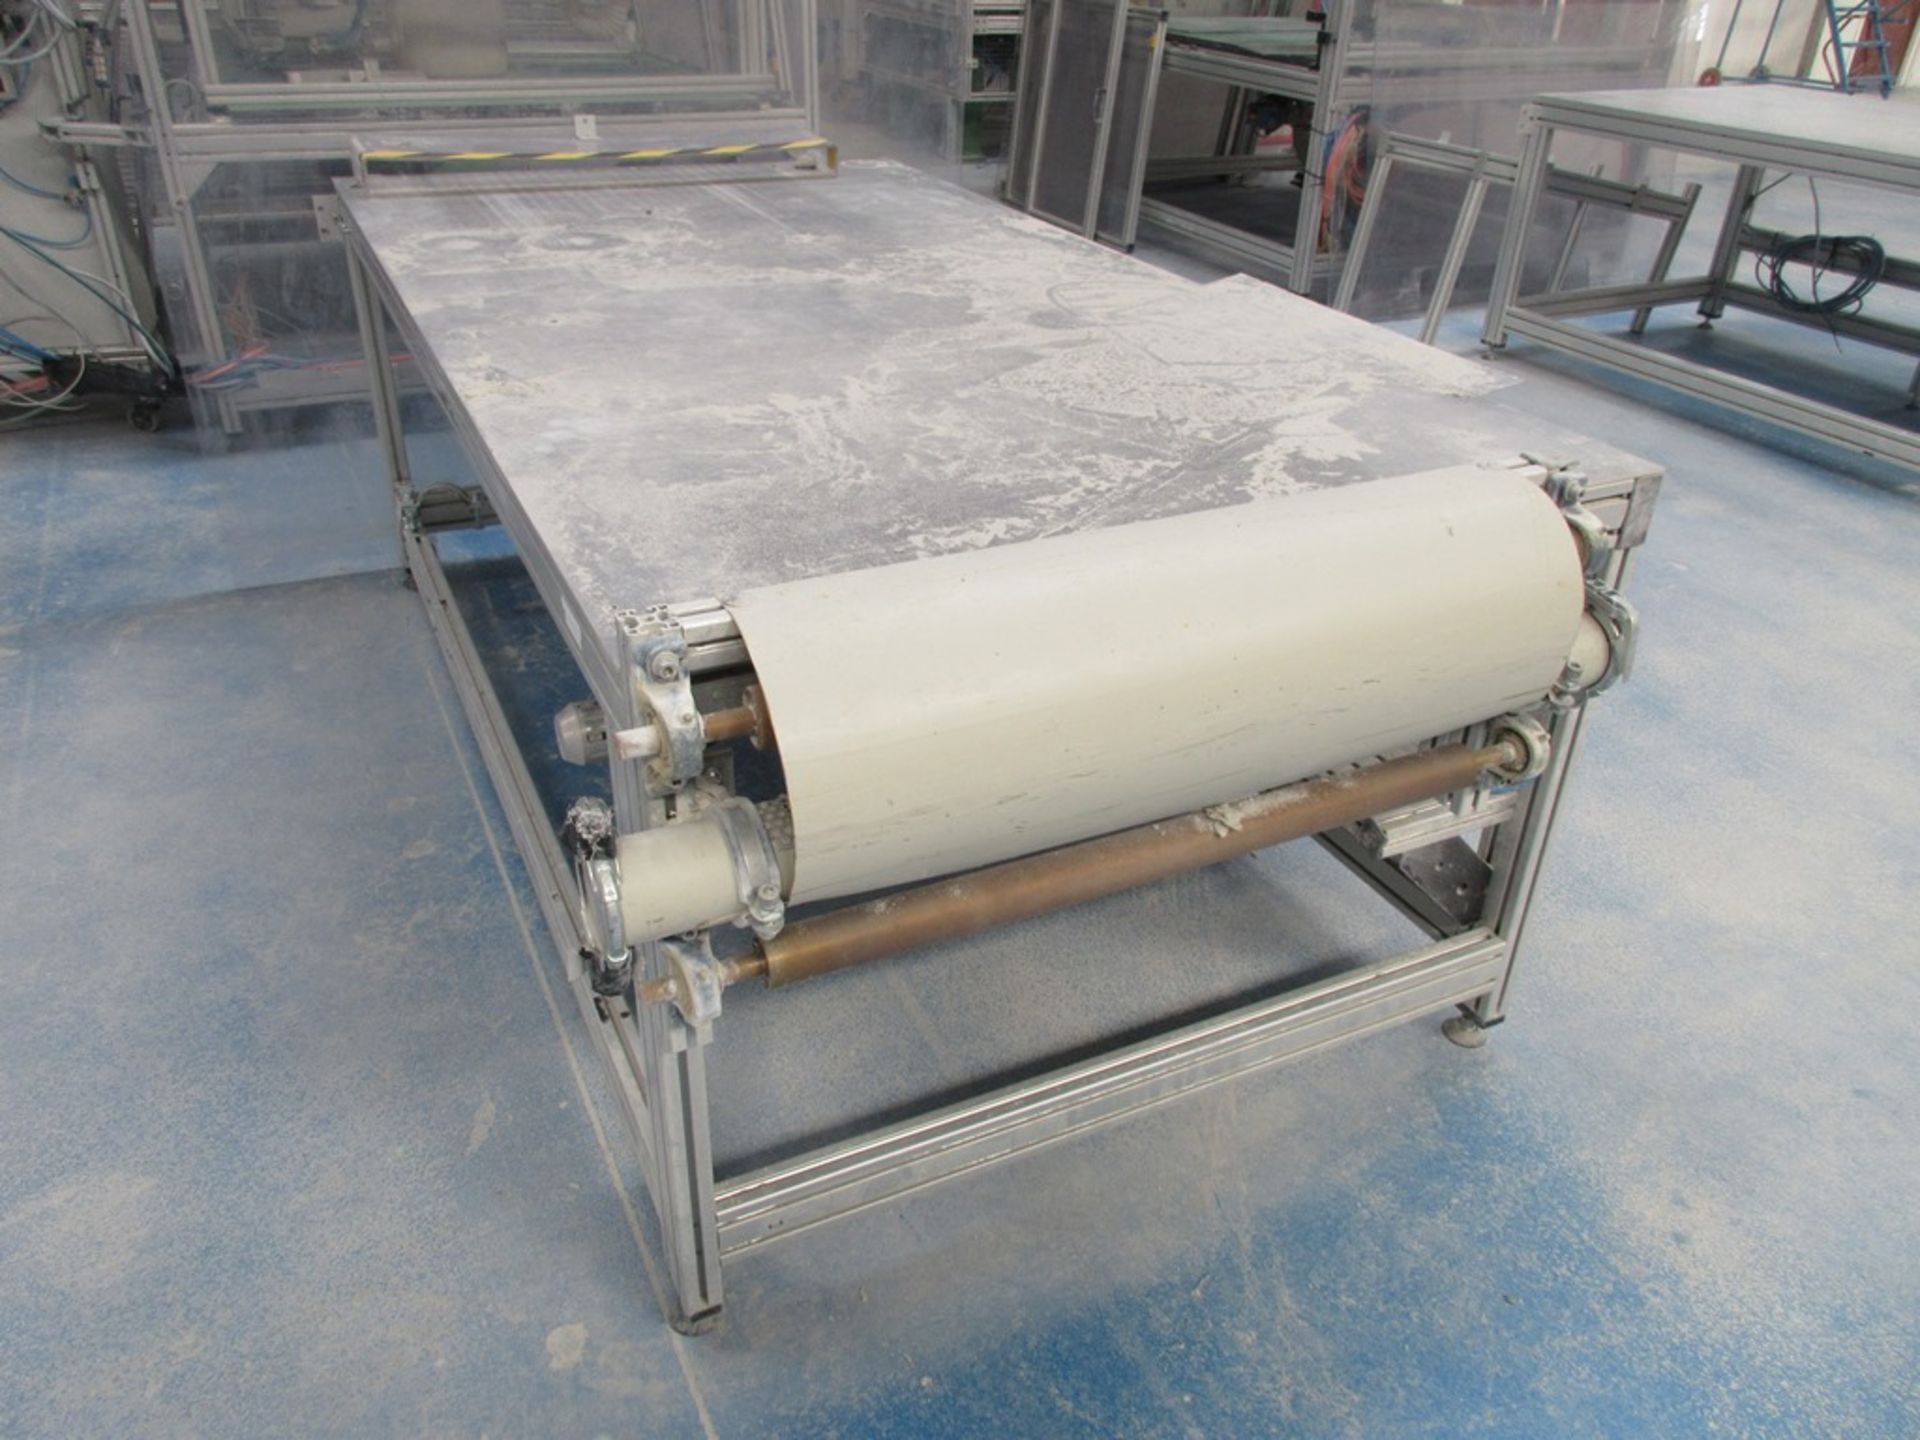 Gasbarre insulation board, 28 tonne electric press (no serial no.), bed size 680 x 980mm, working - Image 11 of 12